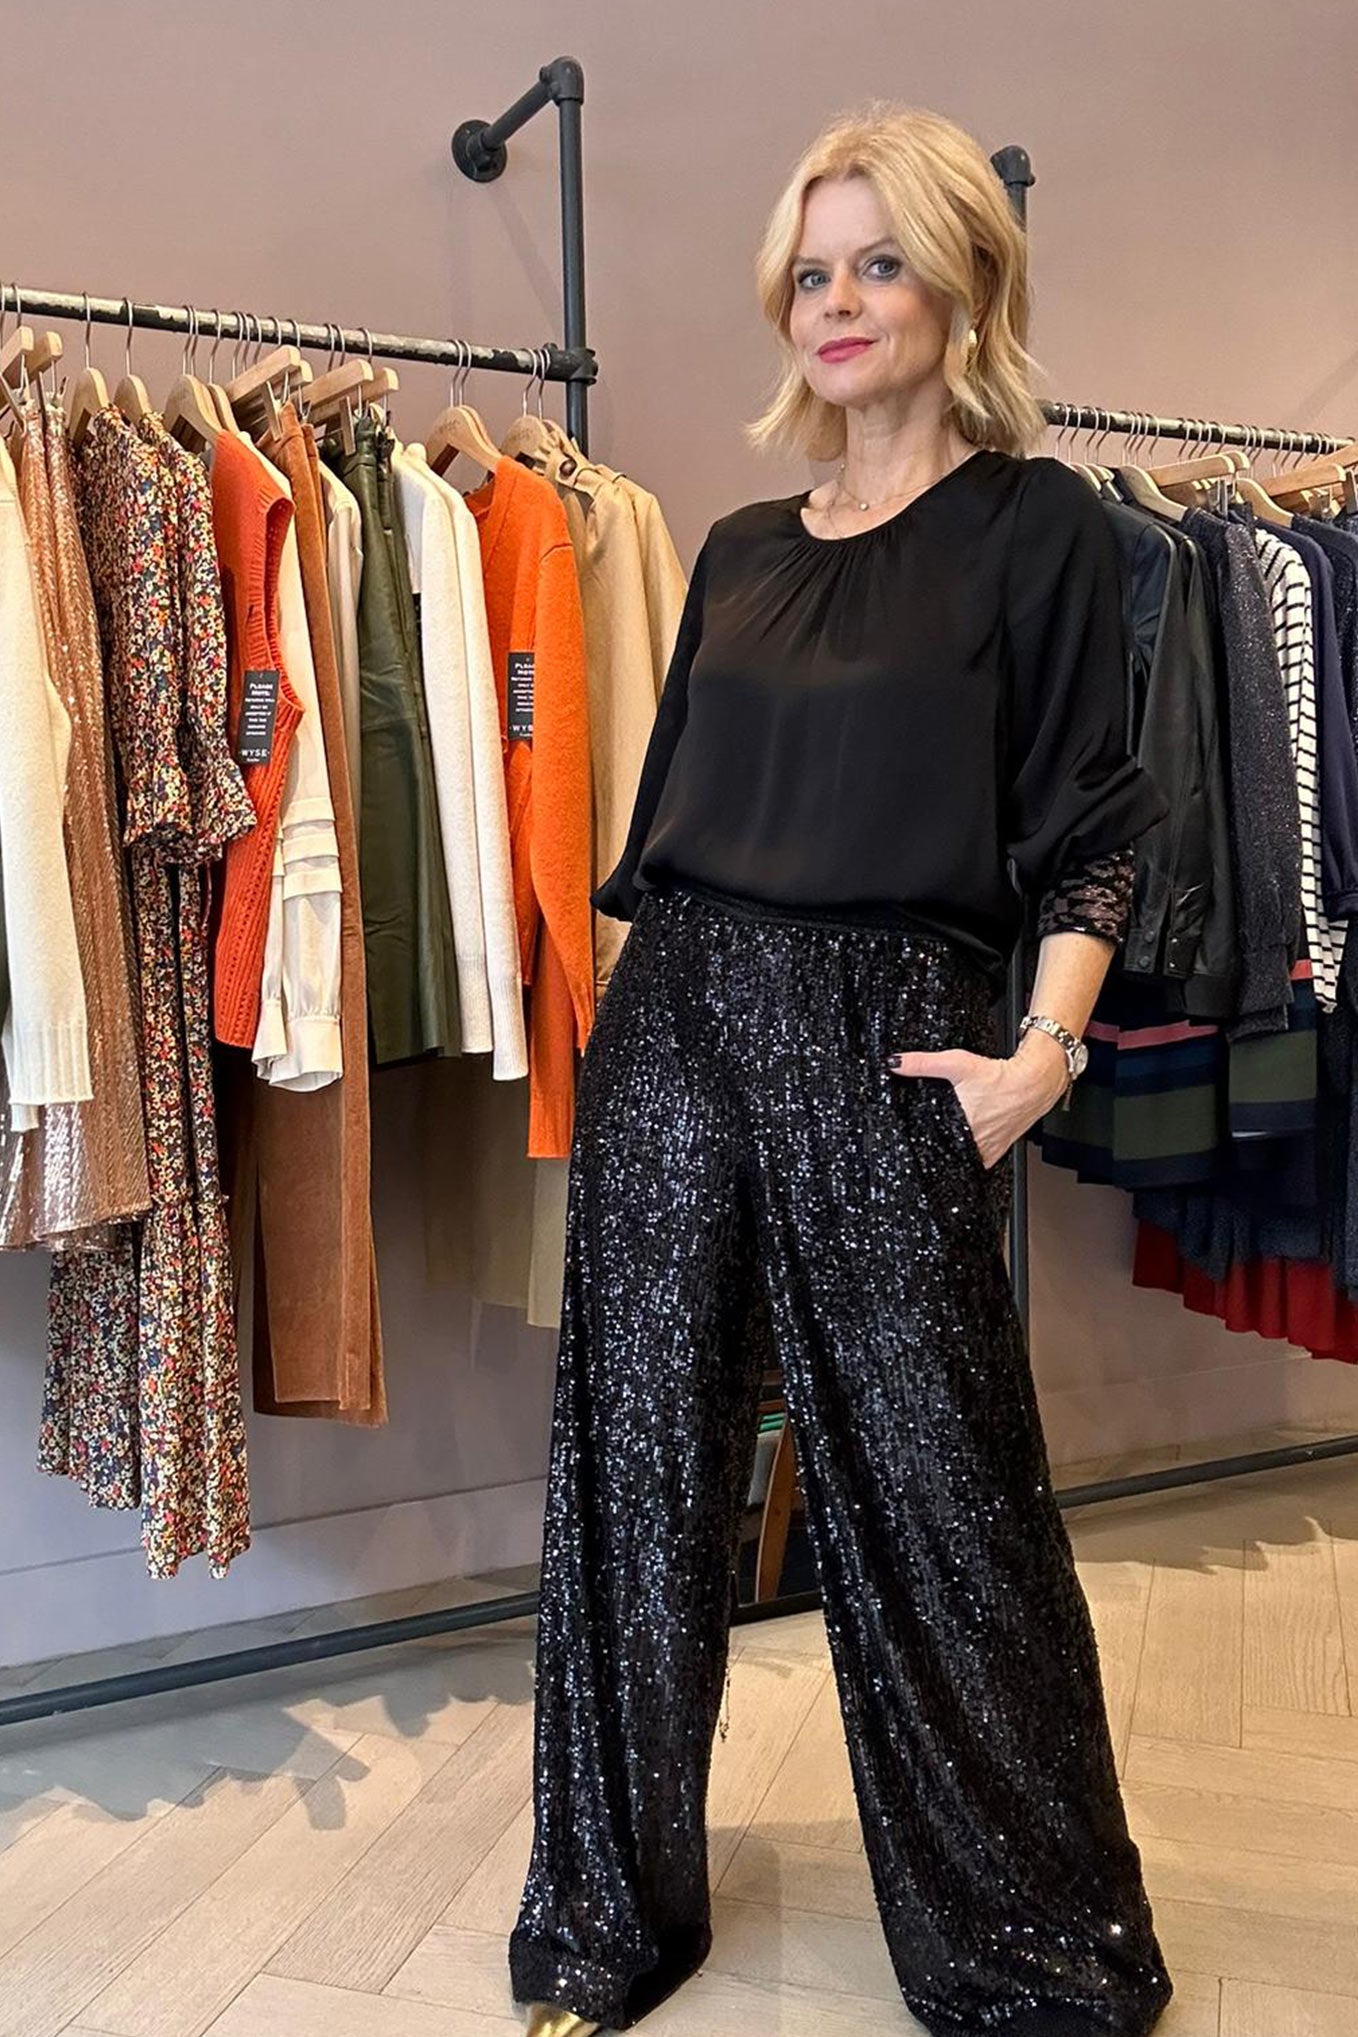 M&S shoppers go wild for 'flattering' sequin trousers that are perfect for  parties - Mirror Online